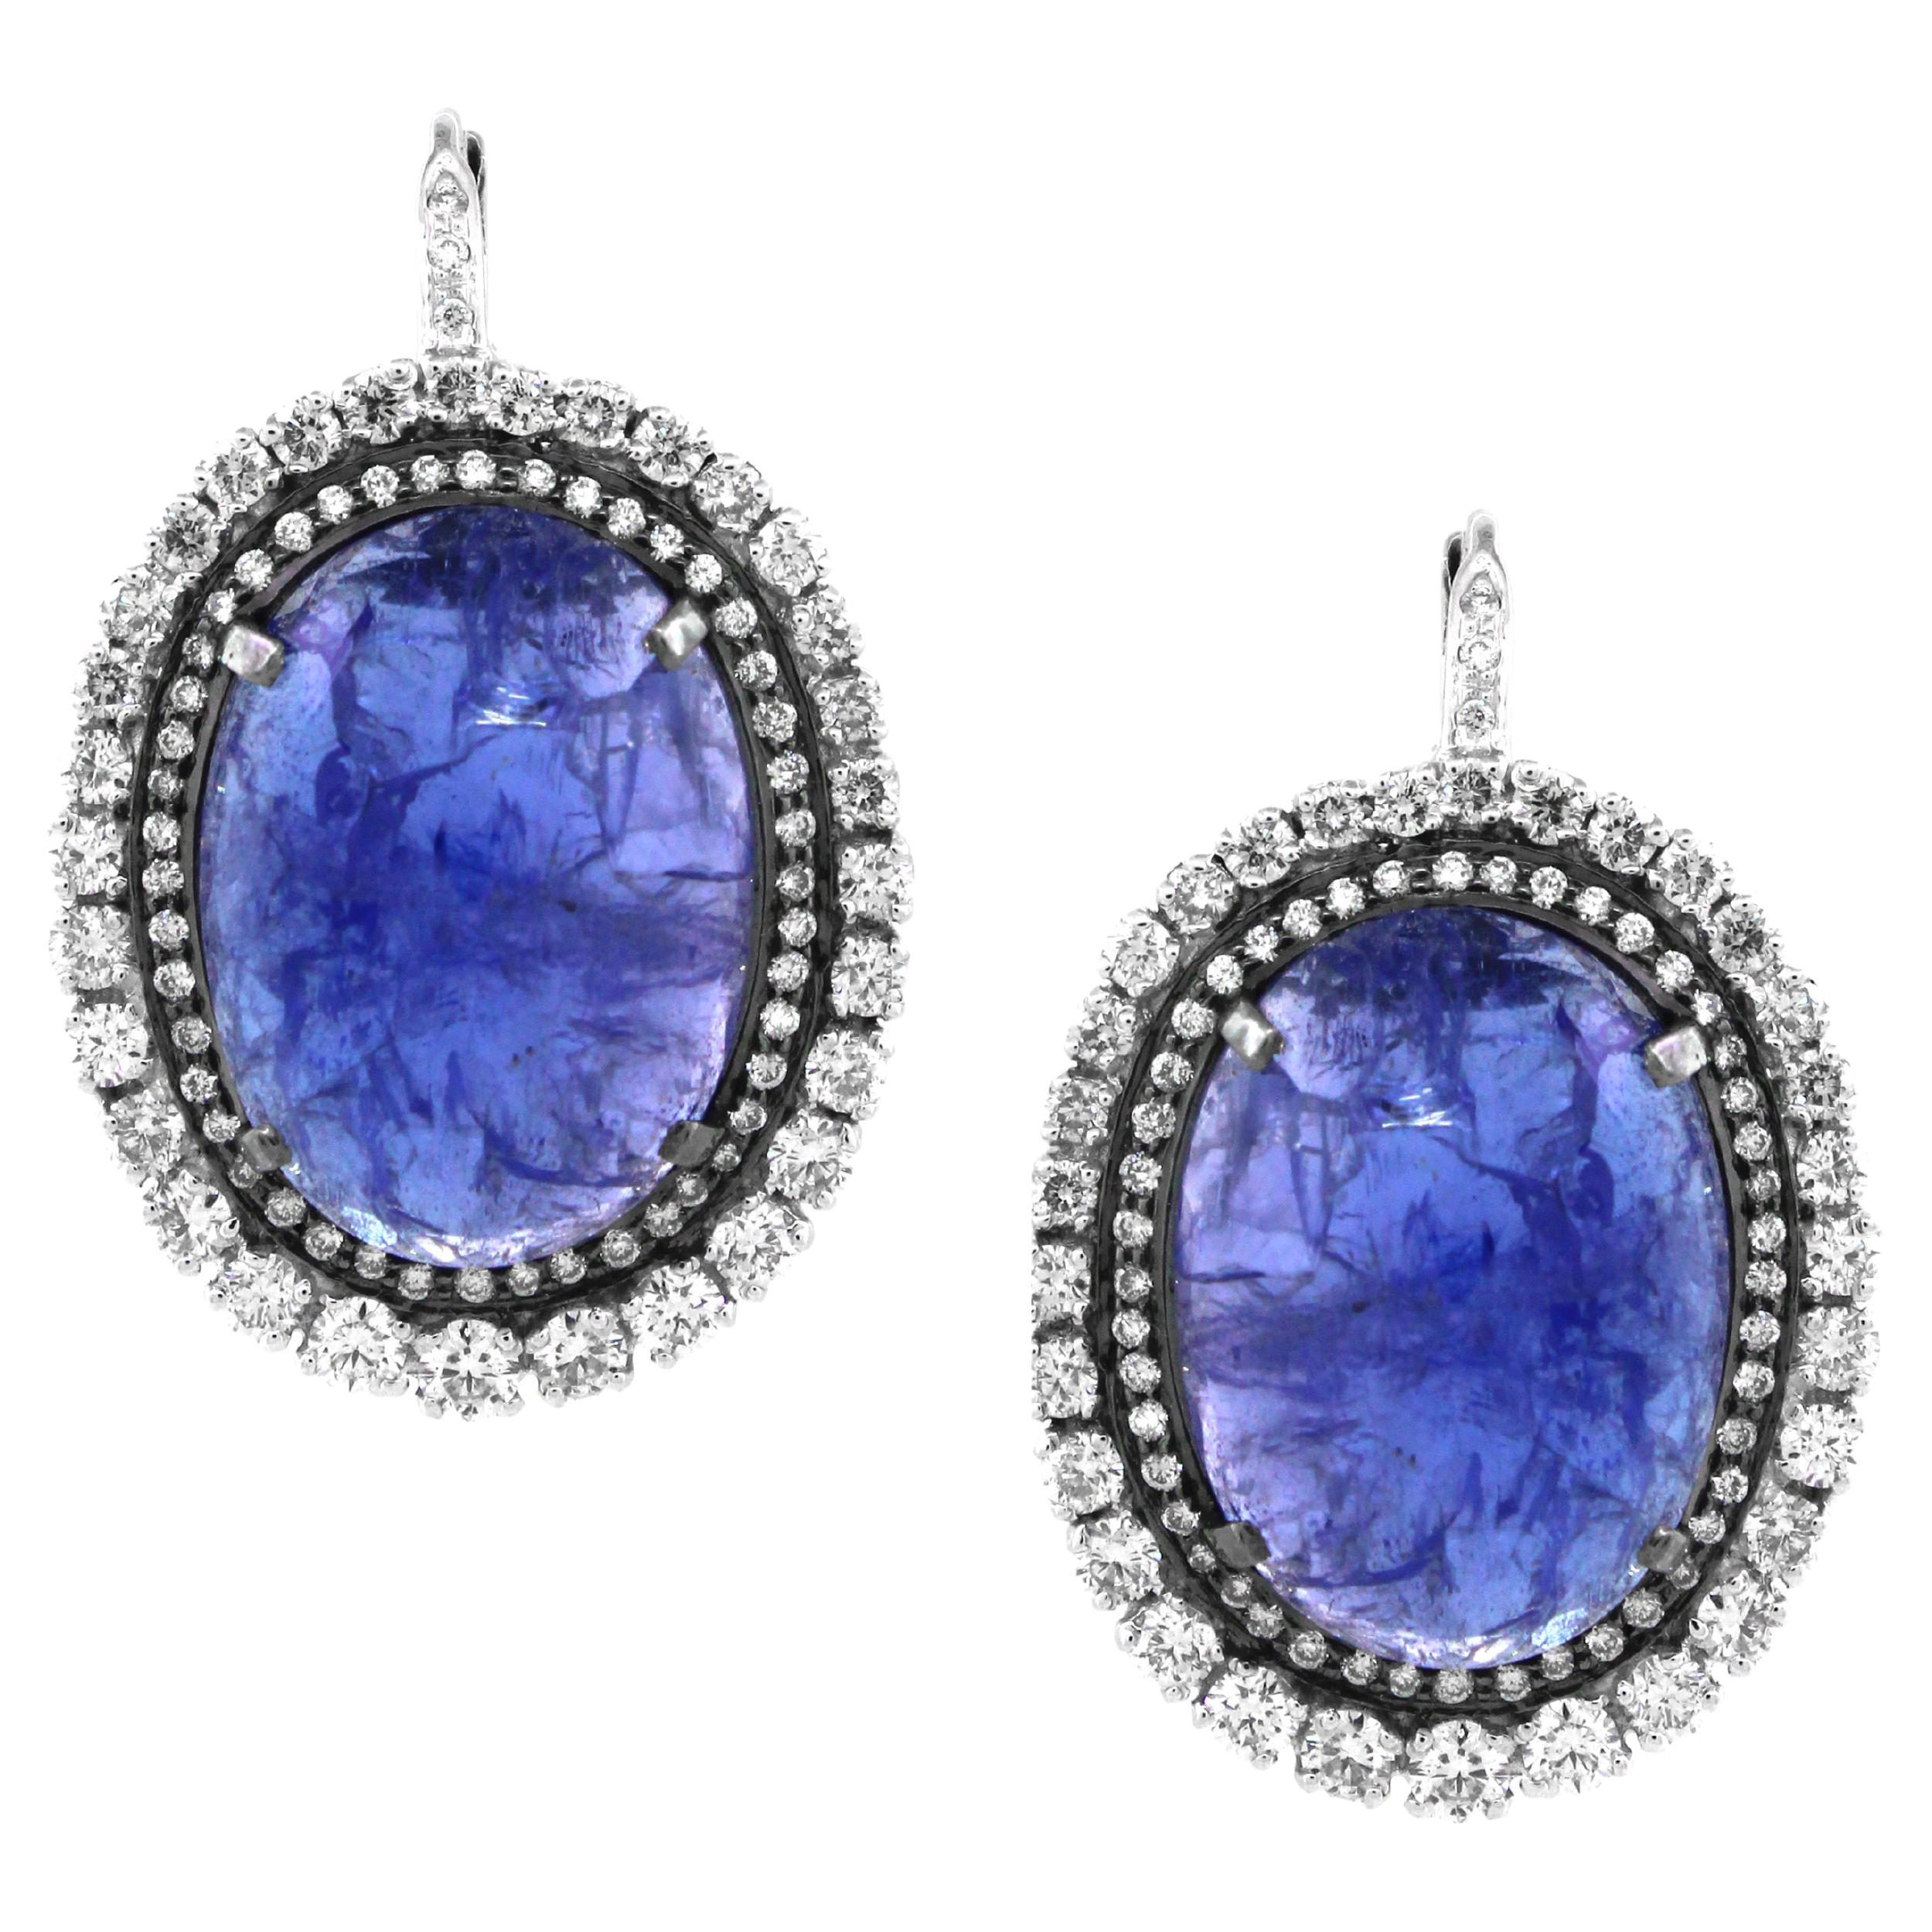 26.72 carats of Tanzanite Stud Earrings For Sale